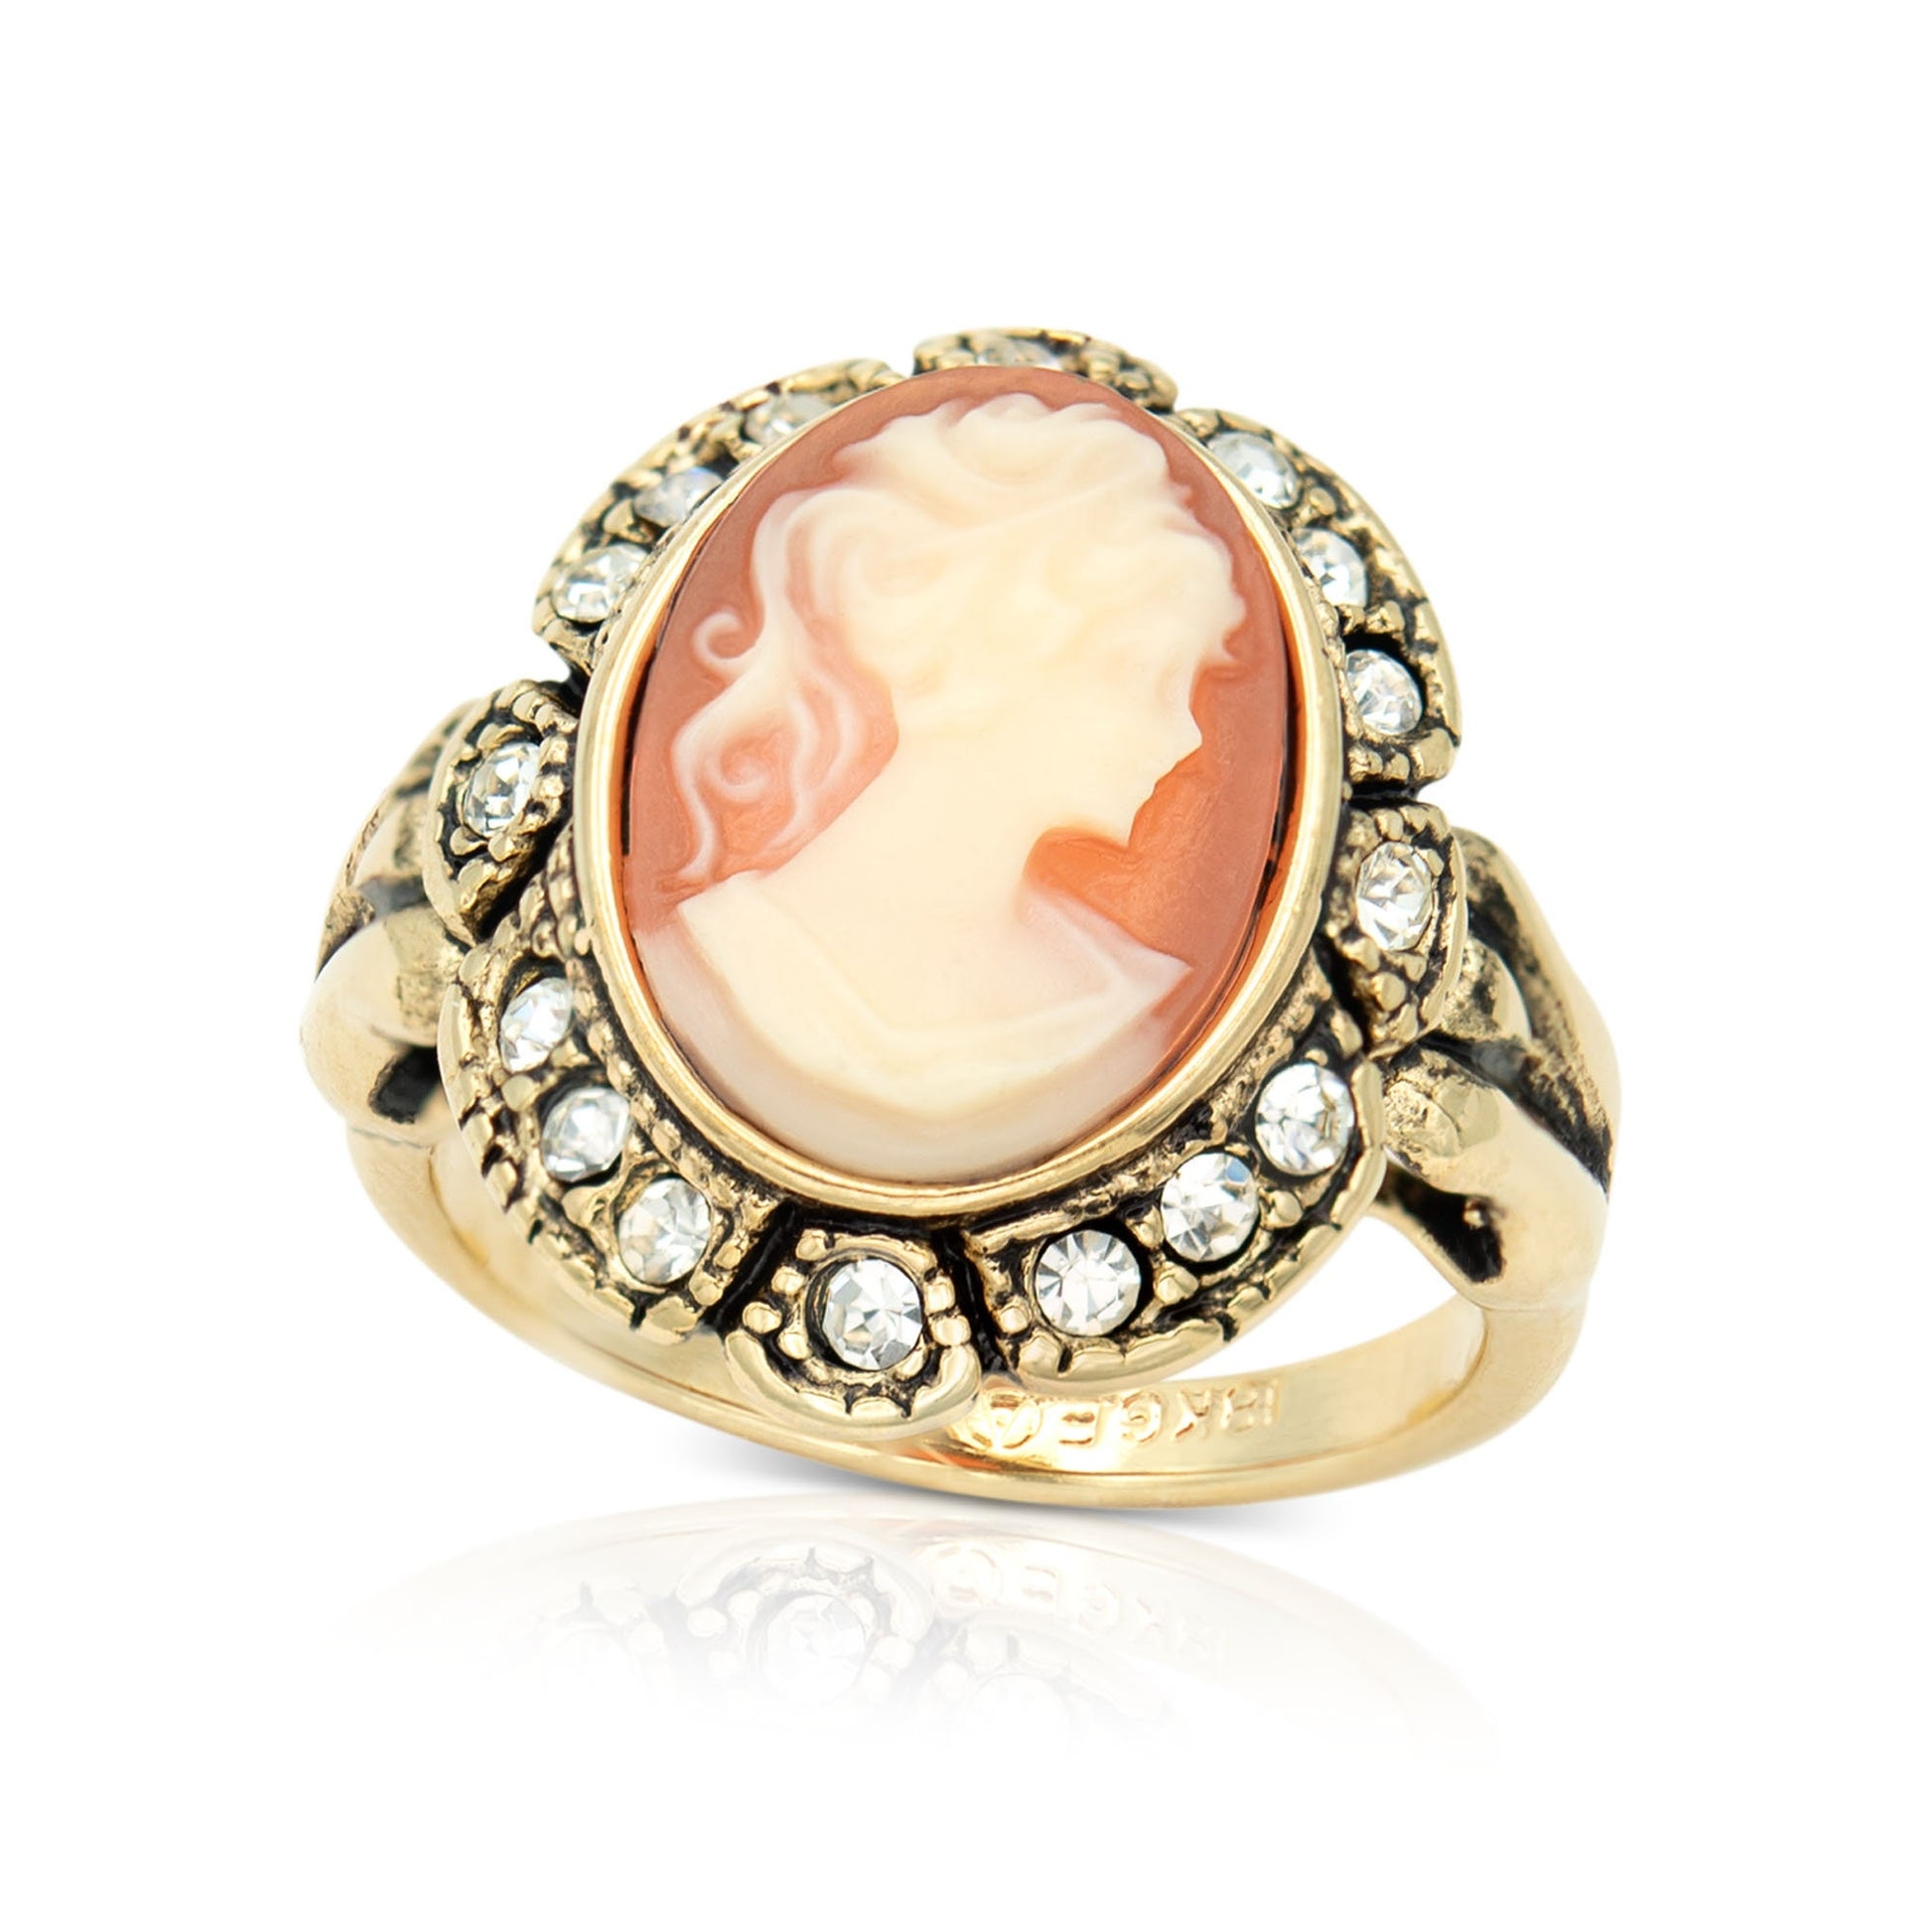 Vintage Ring 1970s 18k Antique Gold Plated White on Coral Cameo Ring Clear Austrian Crystals Womans Costume Handmade Jewelry #R1730